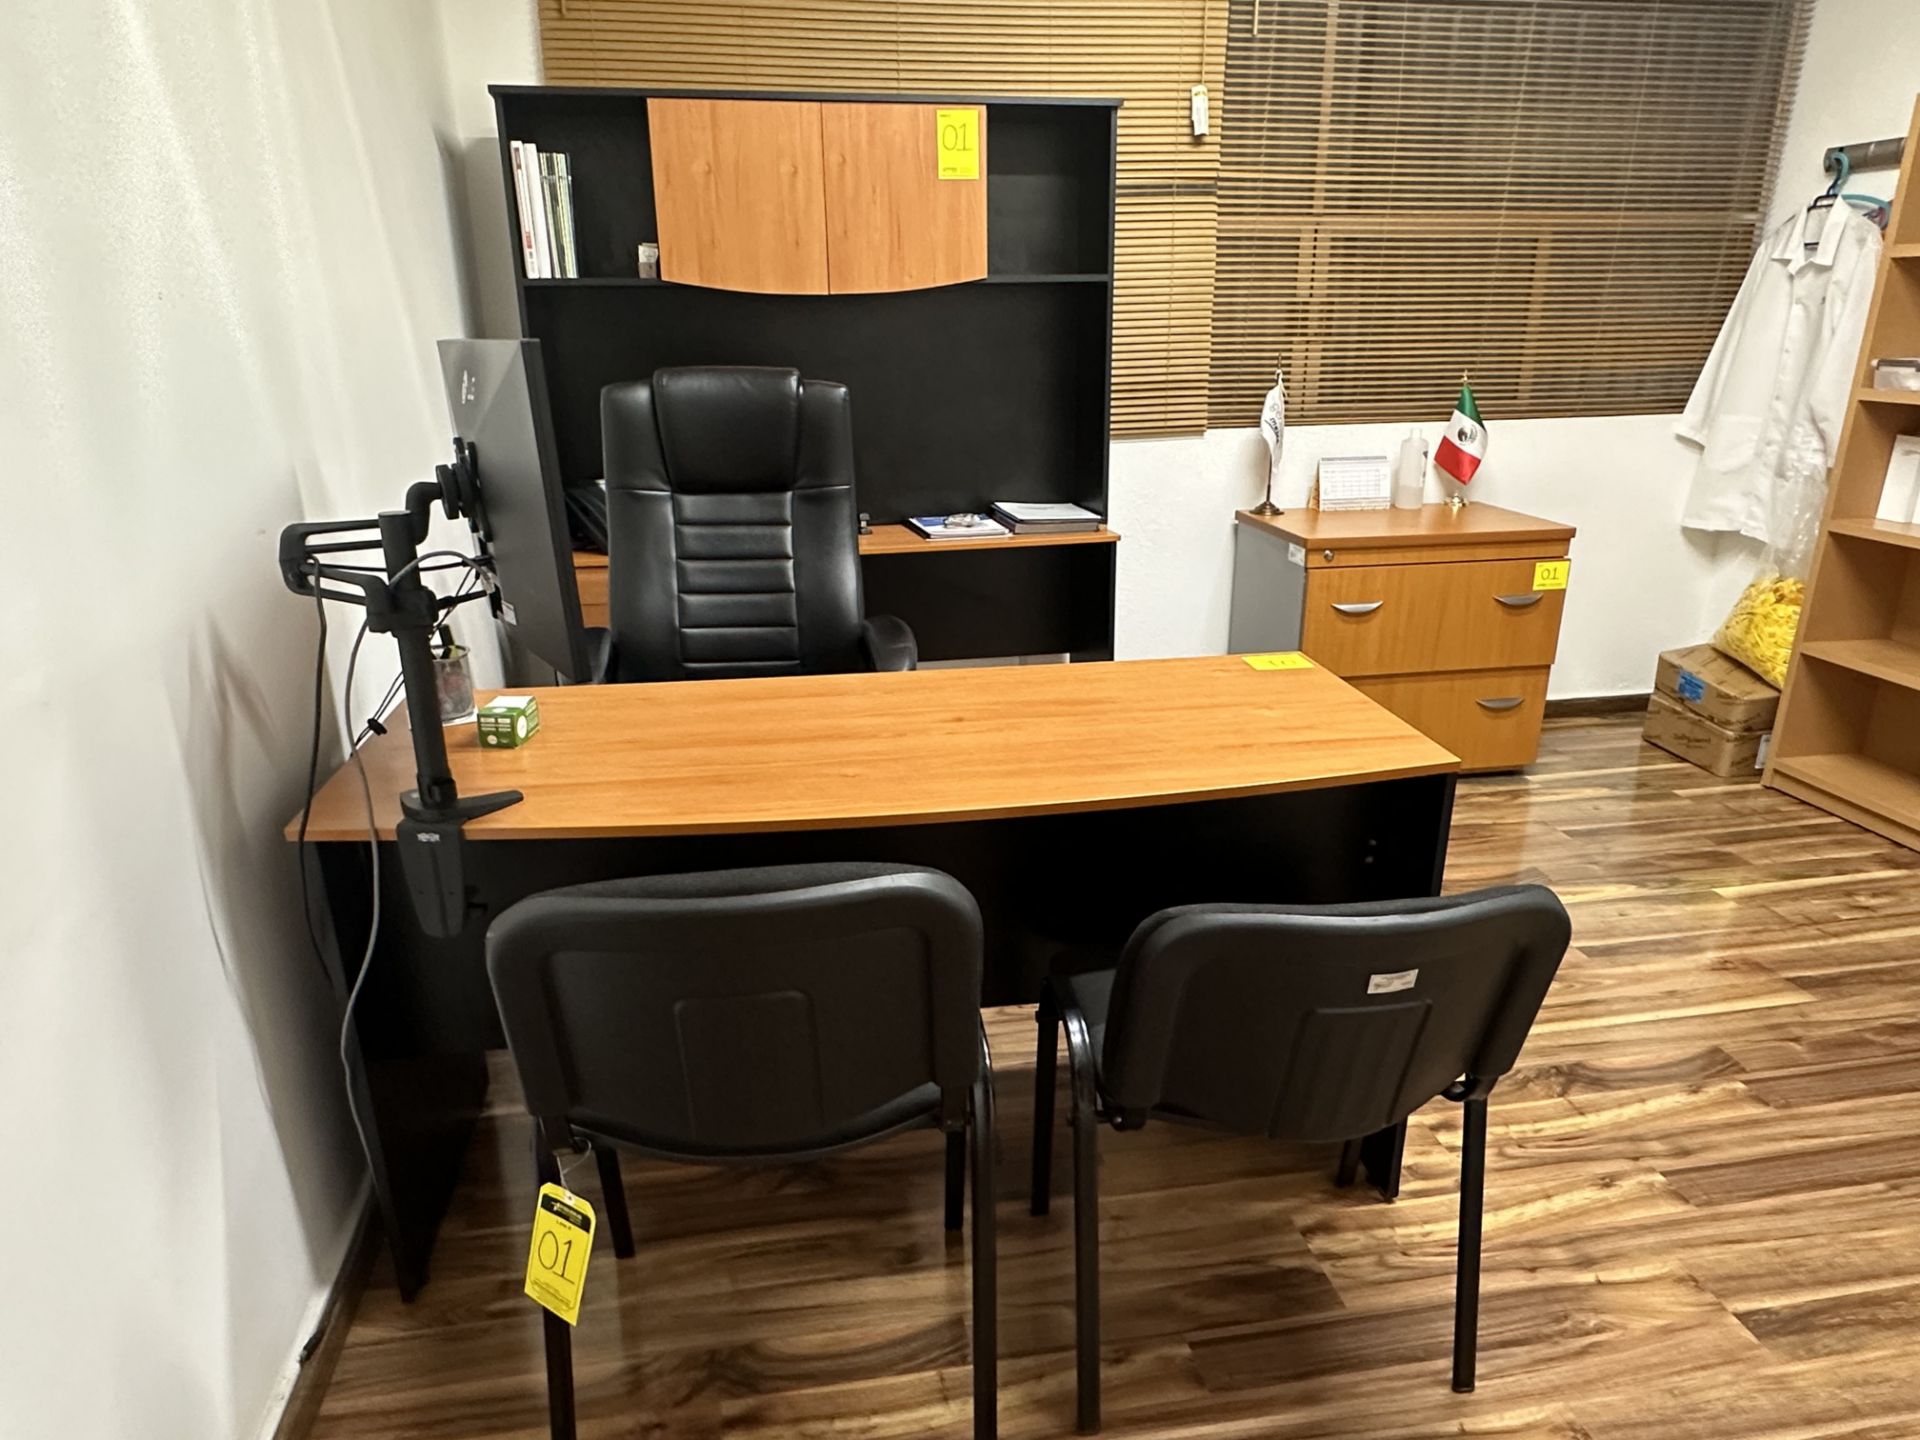 Lot of office furniture includes: 1 Desk in brown wood measures approximately 1.50 x 0.60 x 0.75 m; - Image 6 of 18